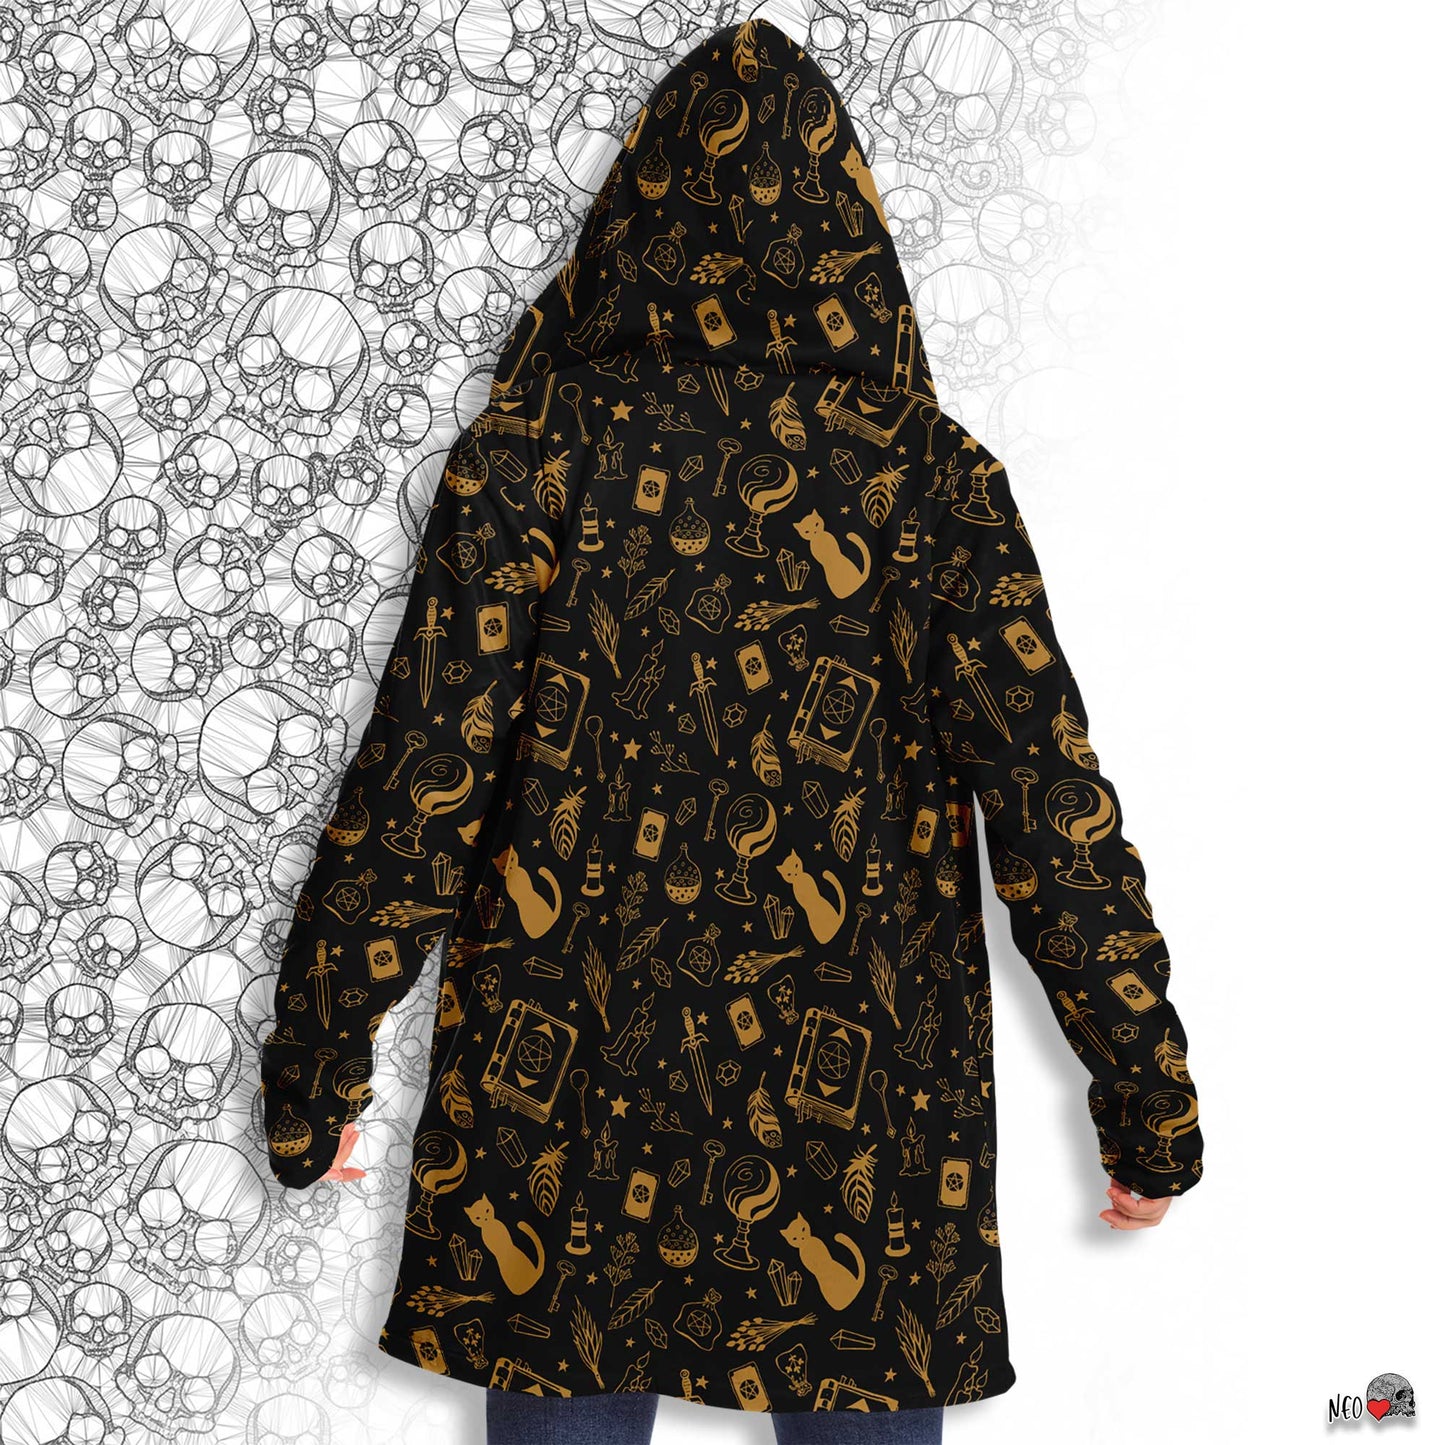 wiccan hooded coat - neoskull